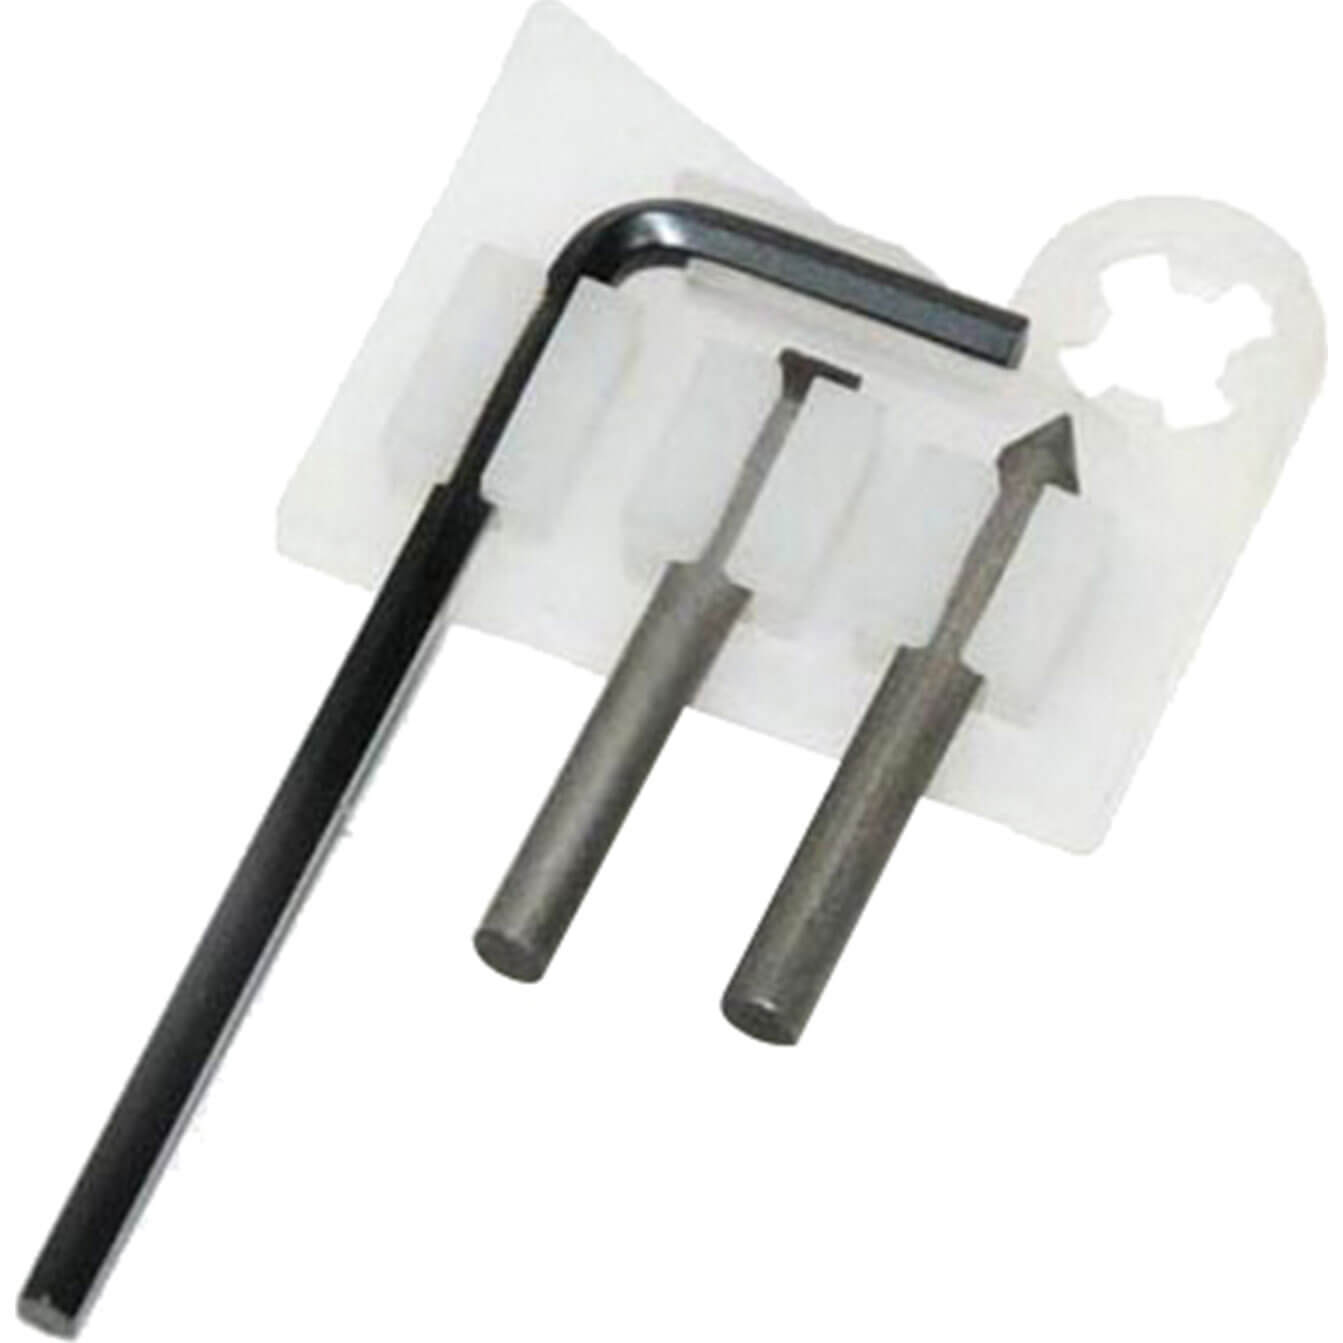 Image of Vitrex 3 Piece Tip Set for Tile Grout Out Tool